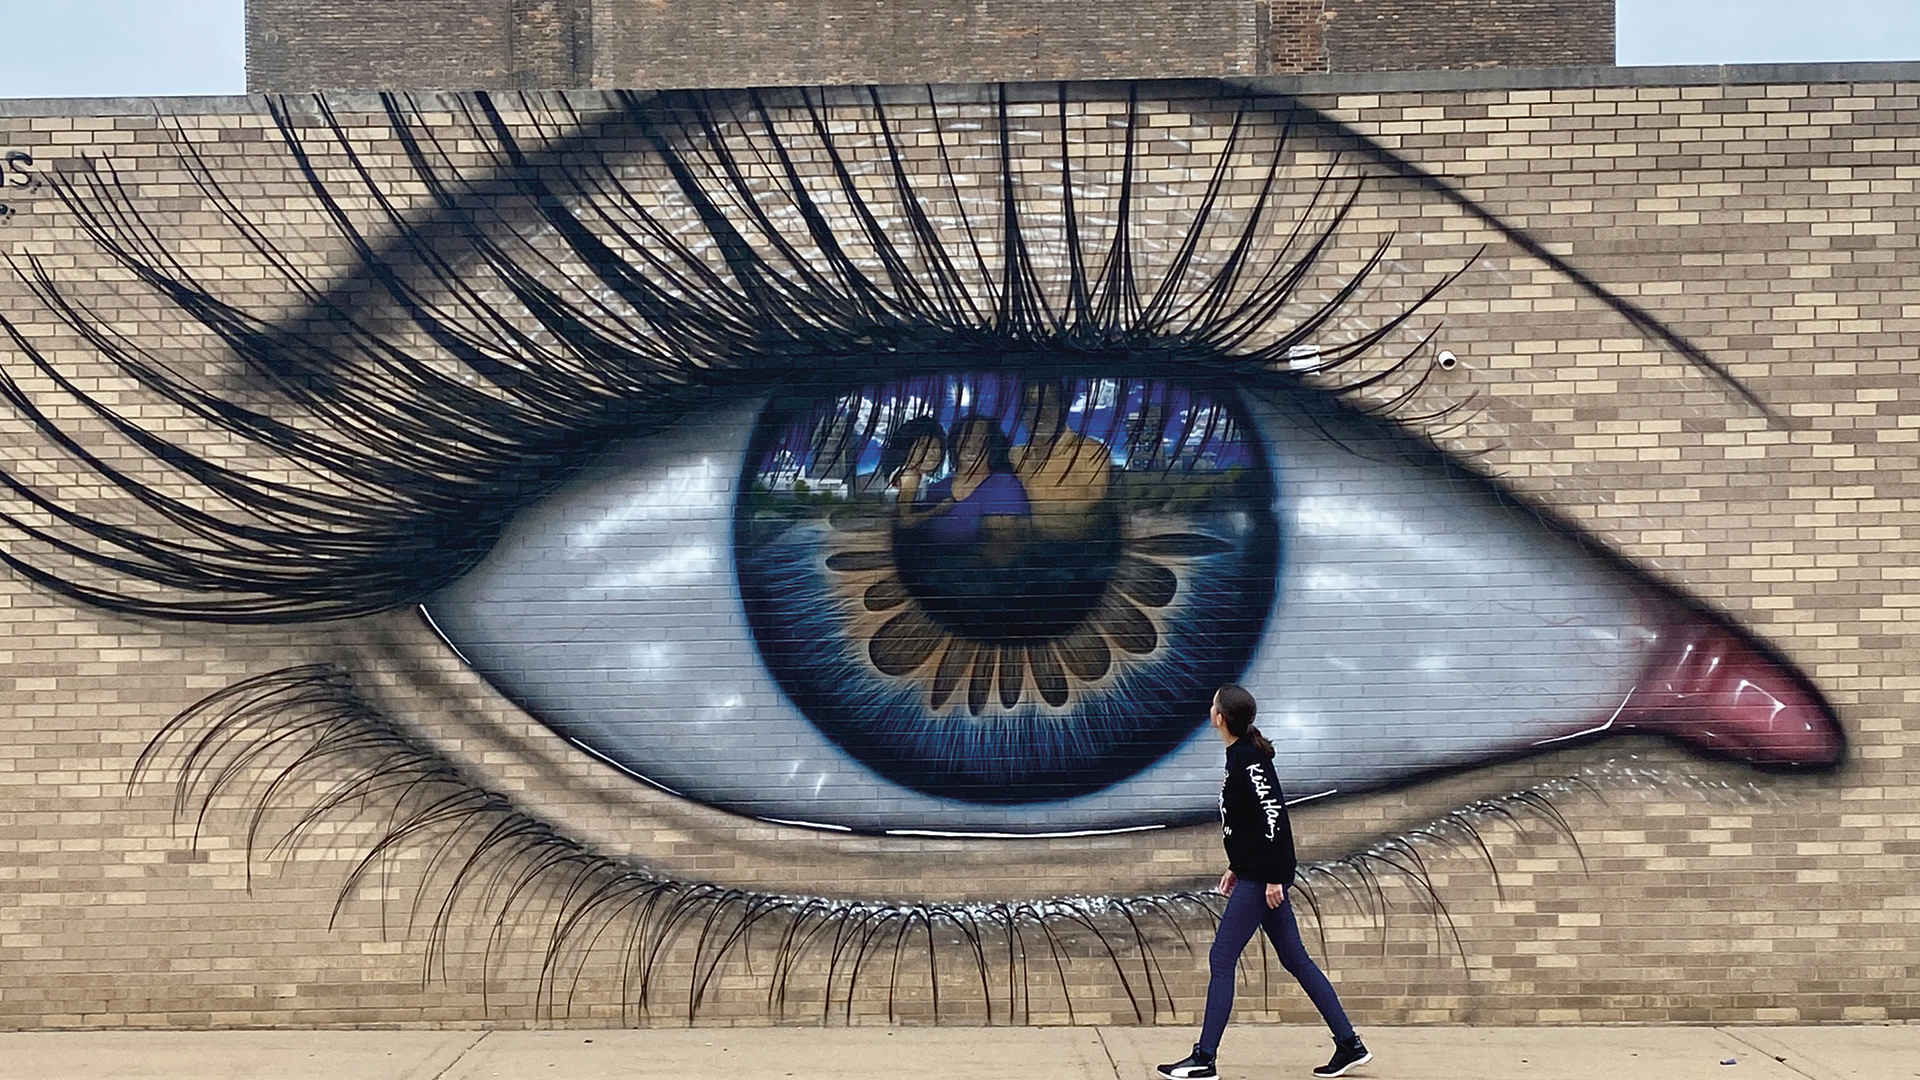 Large-scale mural of an eye by My Dogs Sighs in Jackson, Michigan (2020)